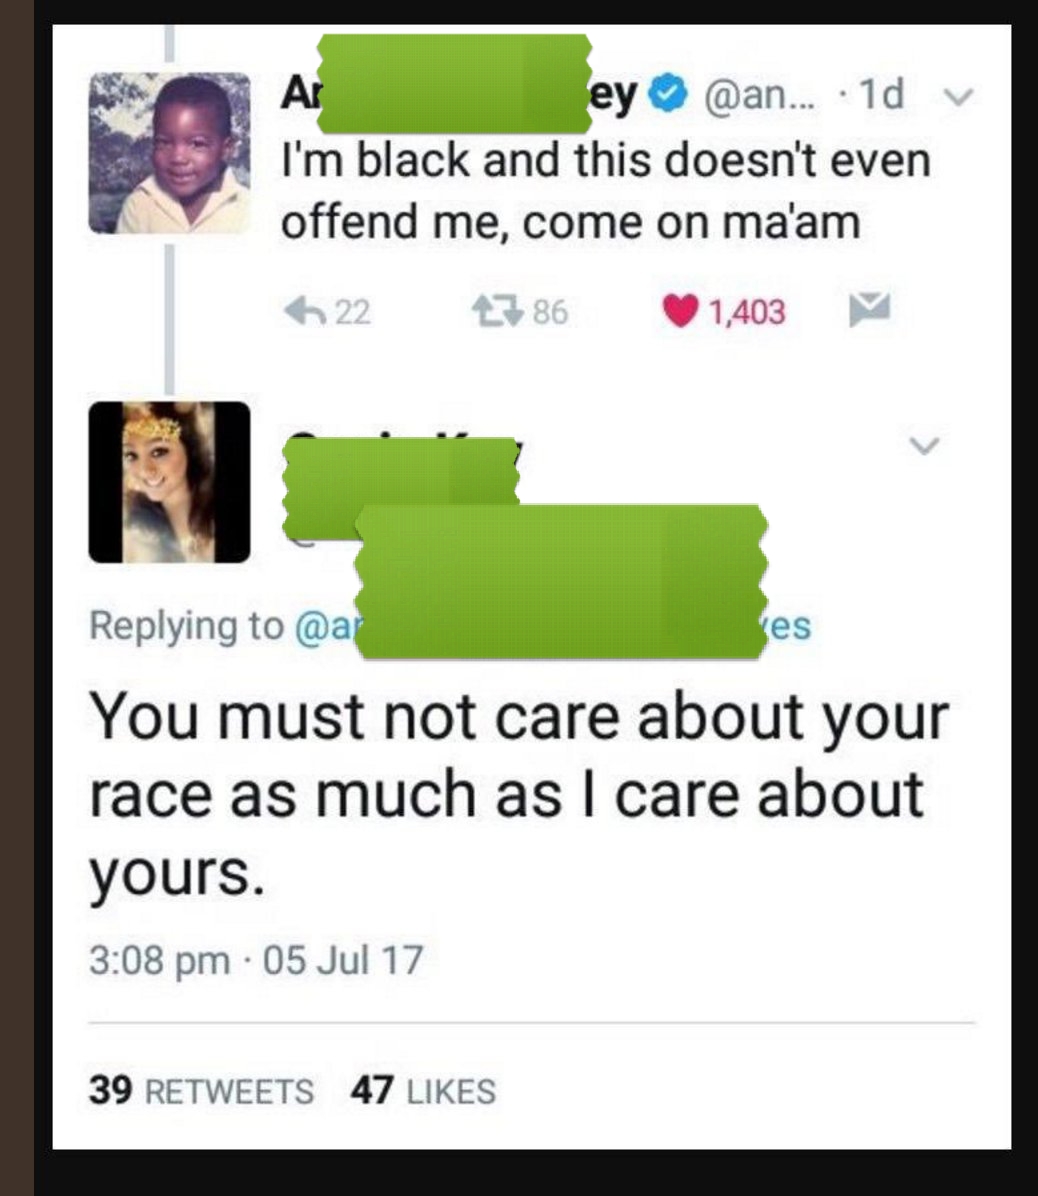 SJW who claims to care more about black people than an actual black person.